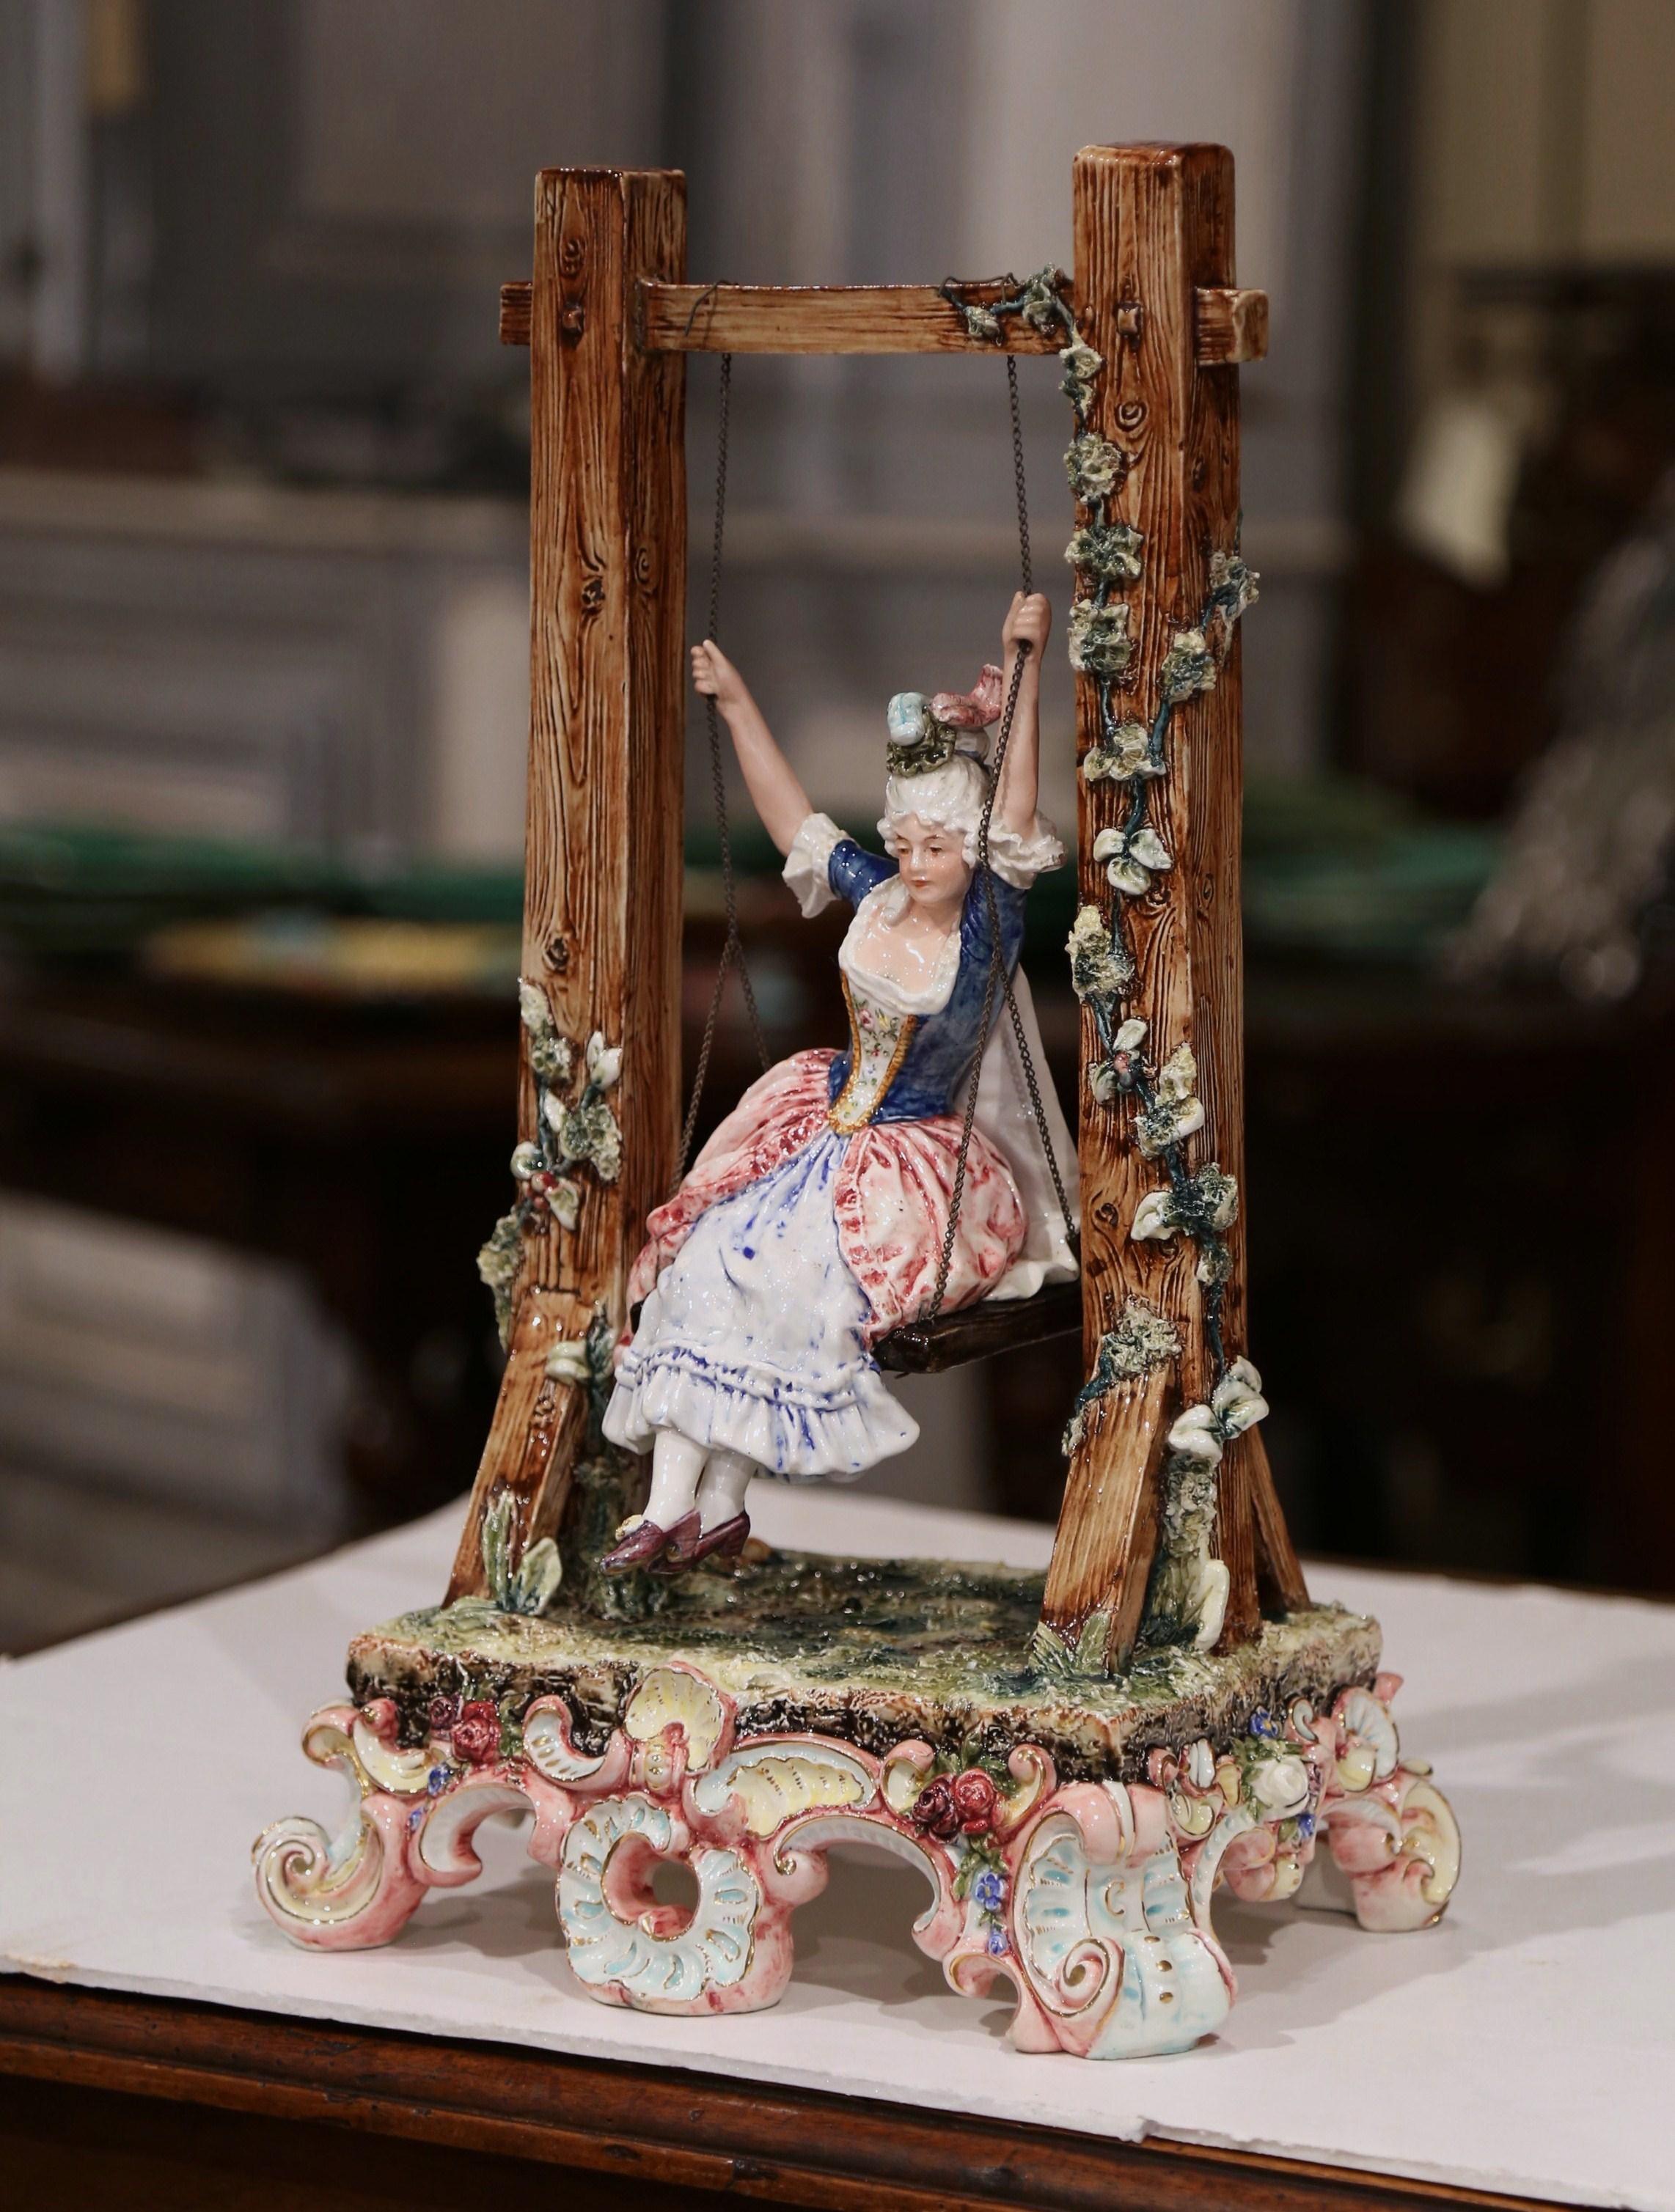 Decorate a shelf or a bookcase with this colorful antique Majolica figure sculpture. Crafted in France, circa 1920, the large, intricate, sculptural piece features a young woman balancing on a swing in a courtly costume. The style and scene are